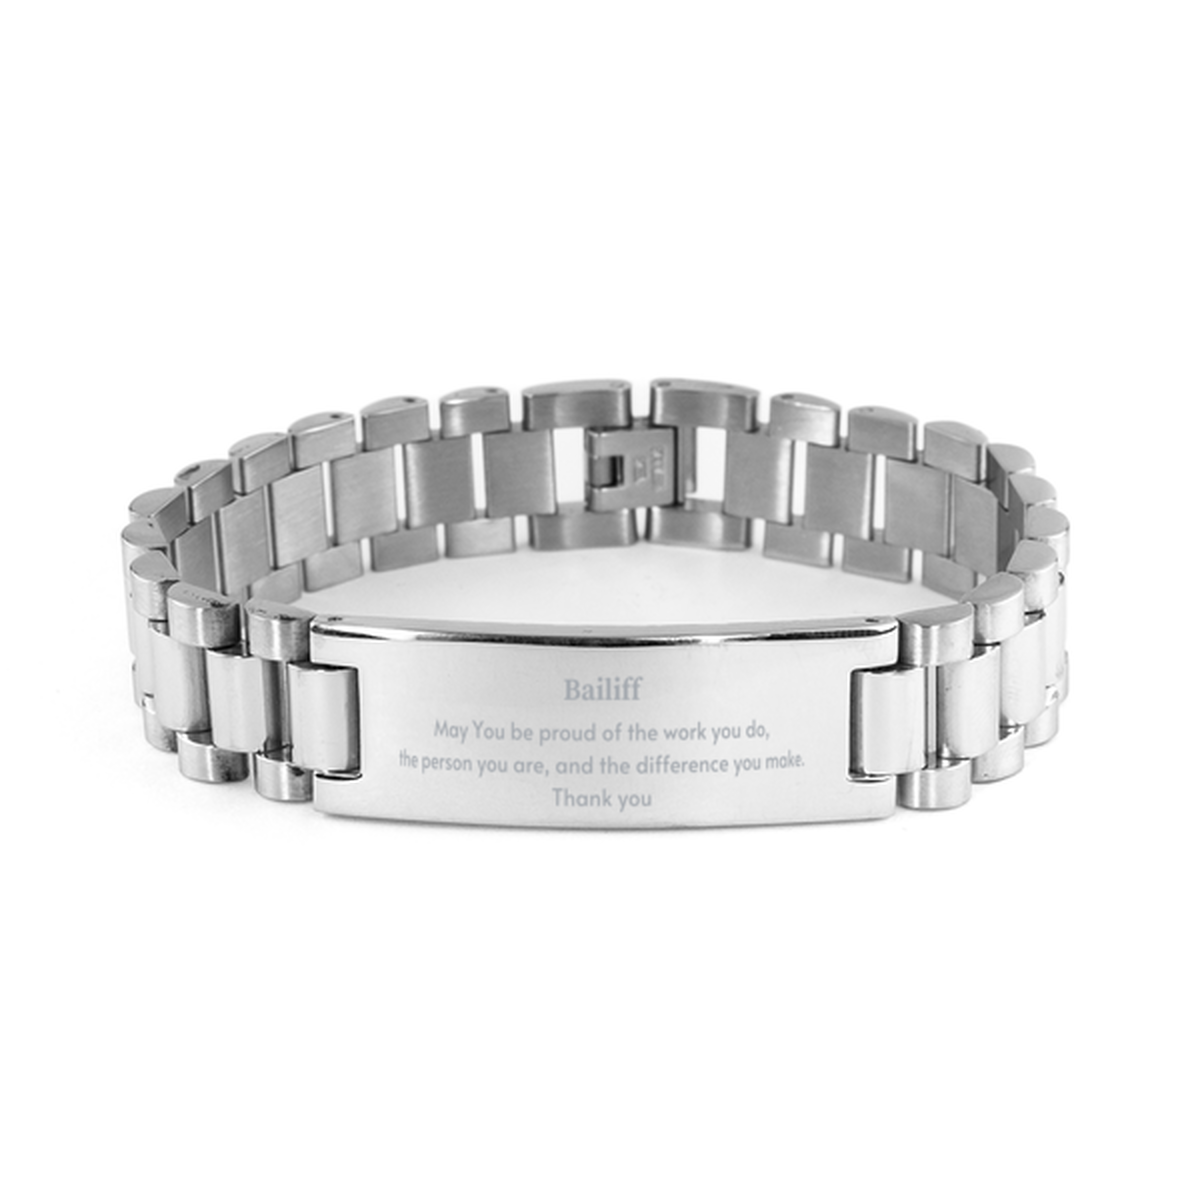 Heartwarming Ladder Stainless Steel Bracelet Retirement Coworkers Gifts for Bailiff, Bailiff May You be proud of the work you do, the person you are Gifts for Boss Men Women Friends